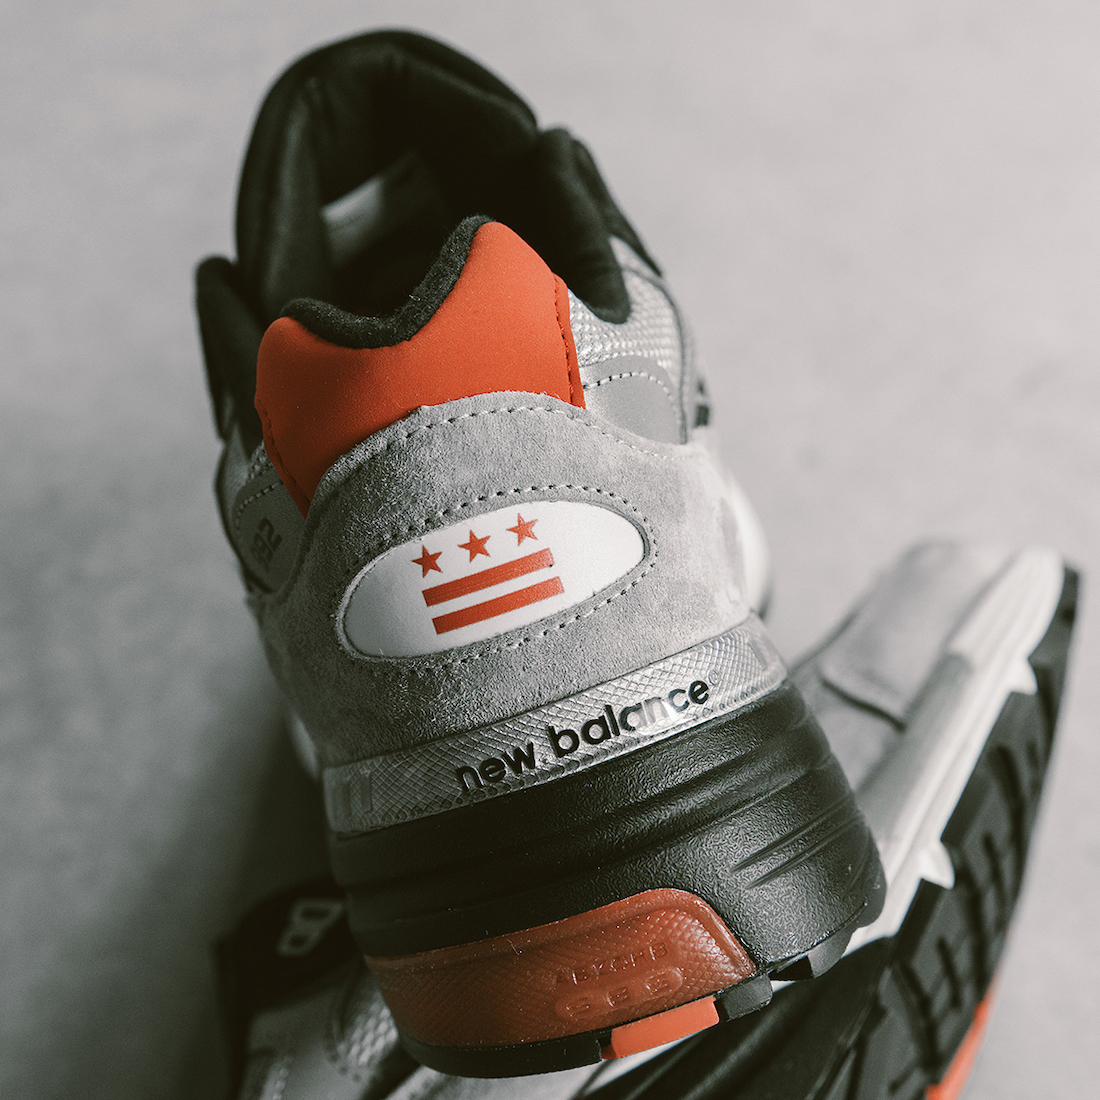 DTLR x New Balance 992 “Discover & Celebrate”